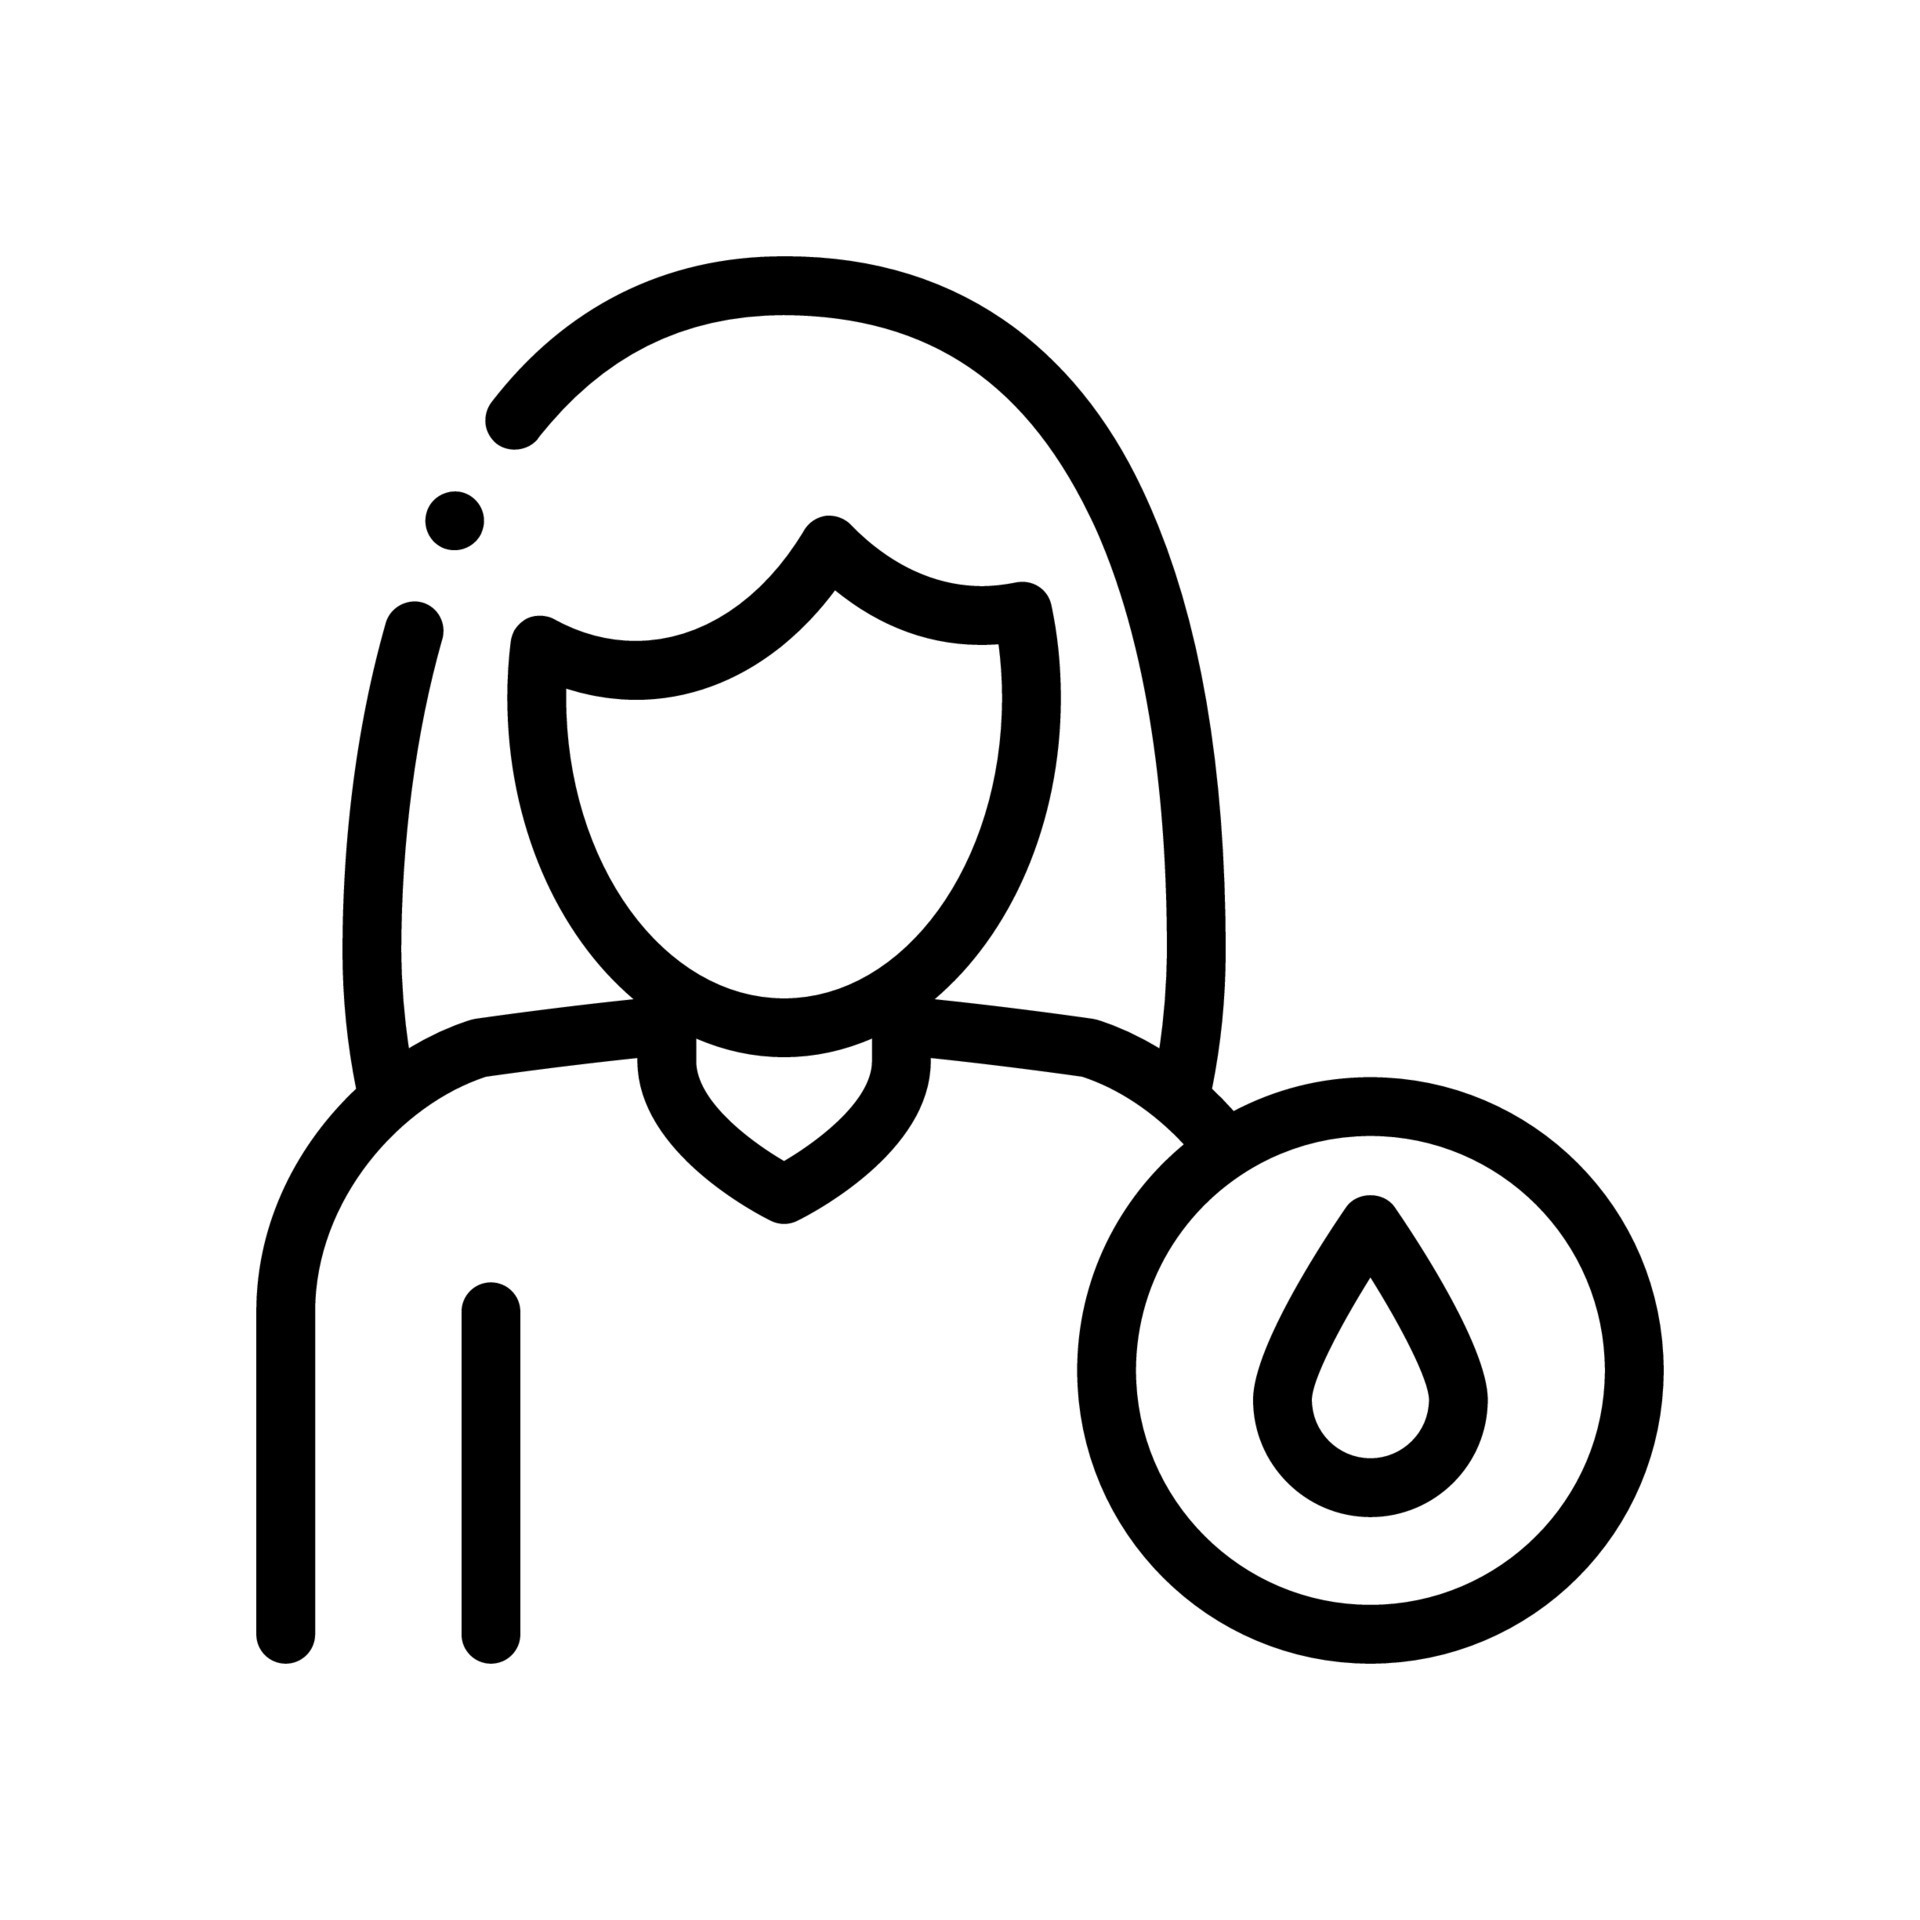 https://static.vecteezy.com/system/resources/previews/017/437/908/original/frequent-urination-symptomp-pregnancy-icon-vector.jpg